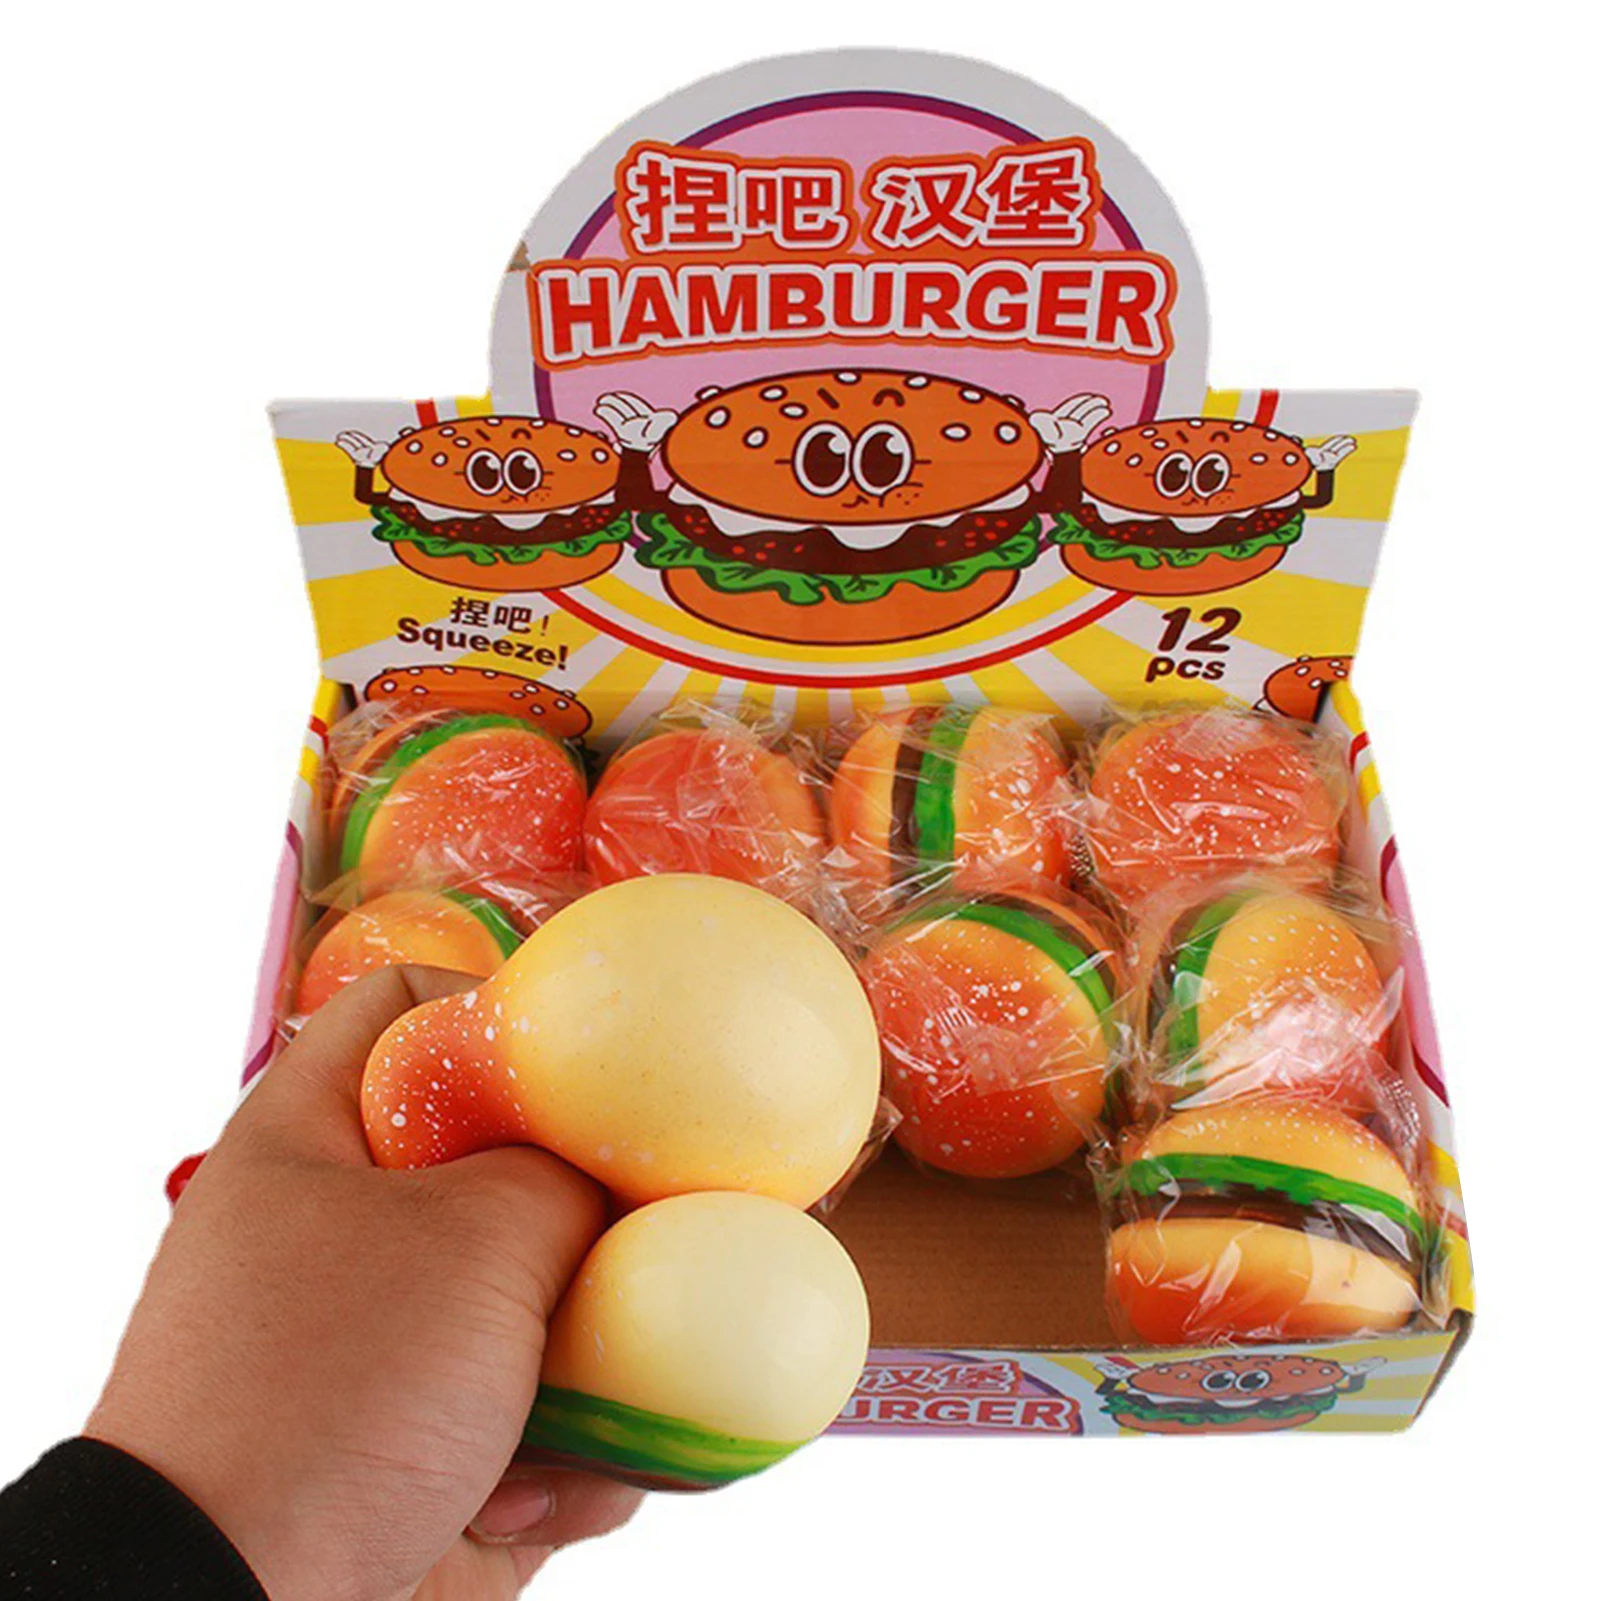 

12 Pcs Hamburger Squishy Stress Balls Squeeze Bread Stress Relief Simulation Cute Food Hand Toy Stretchy Slow Rising Squishy Toy